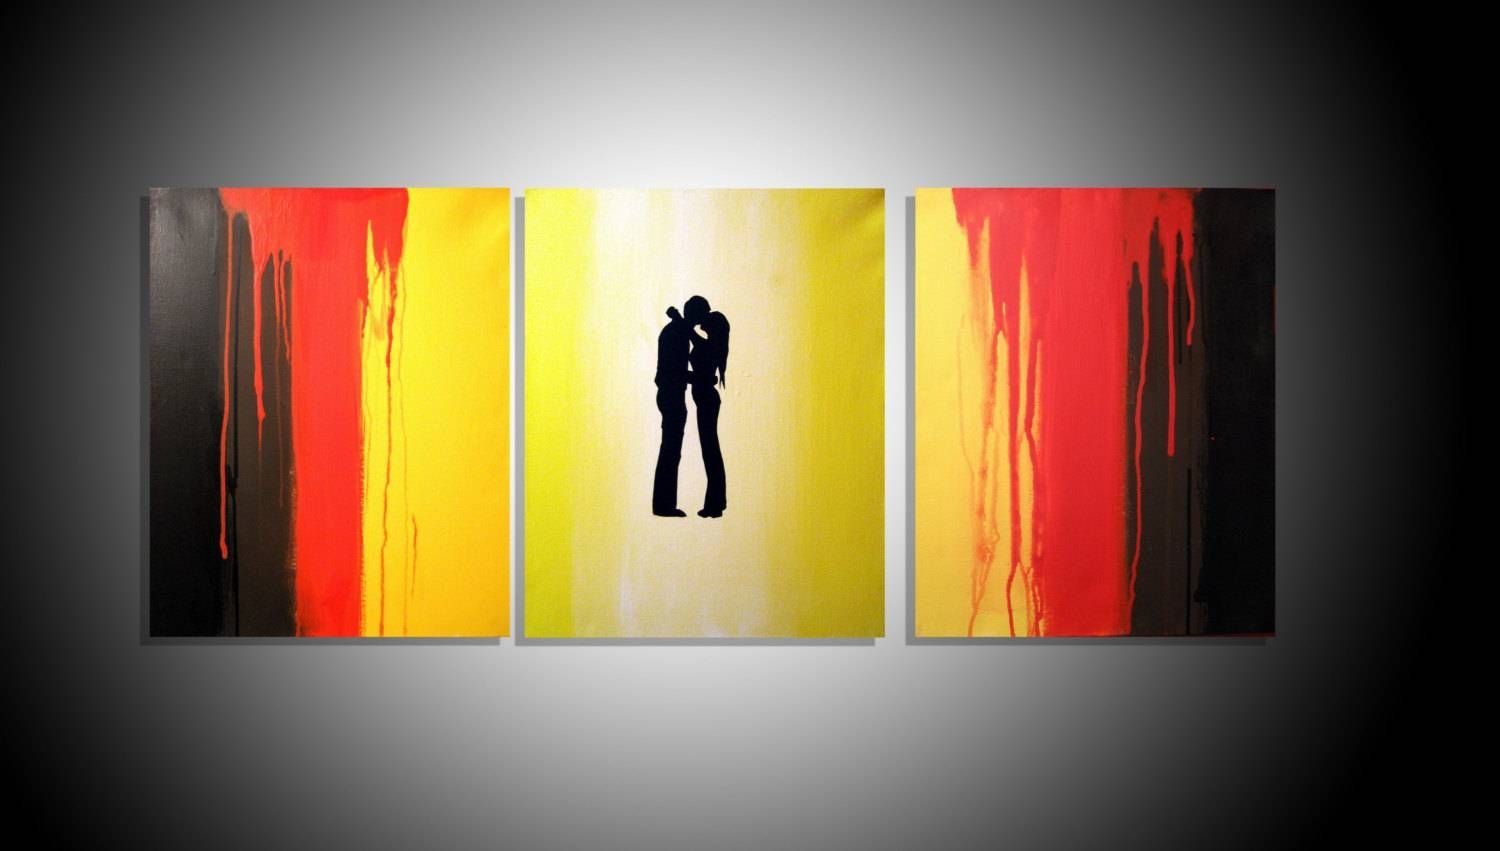 Large Wall Romantic Romance Art Triptych 3 Panel Wall Art Within Most Popular Large Triptych Wall Art (View 10 of 20)